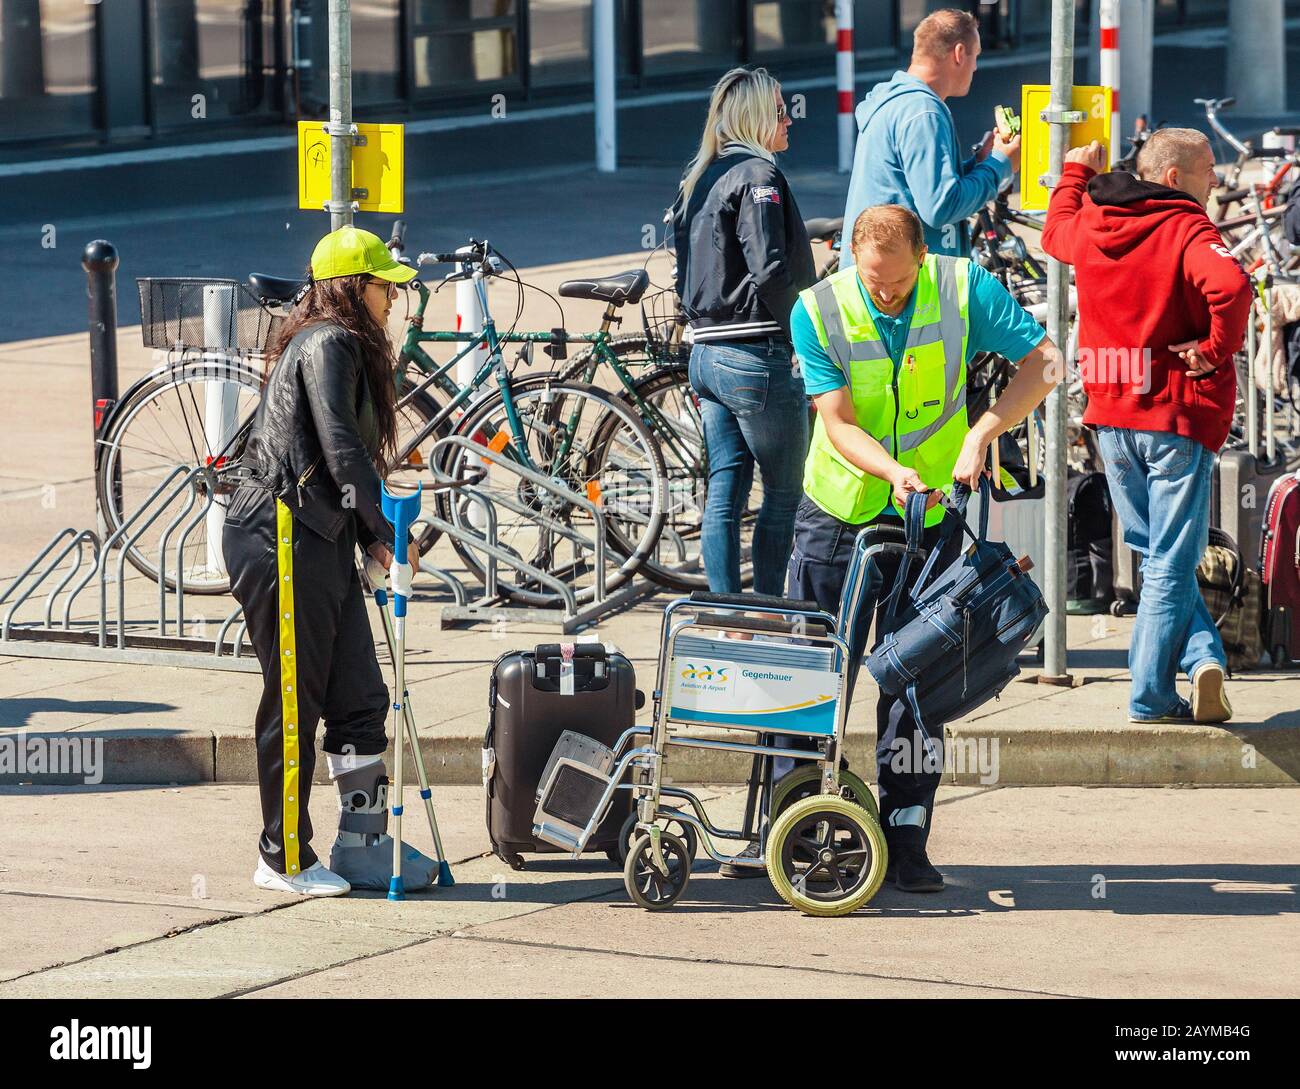 BERLIN, GERMANY, 20 MAY 2018: Assistant helping woman on a wheelchair getting to the bus station near the Schonefeld Airport Terminal Stock Photo